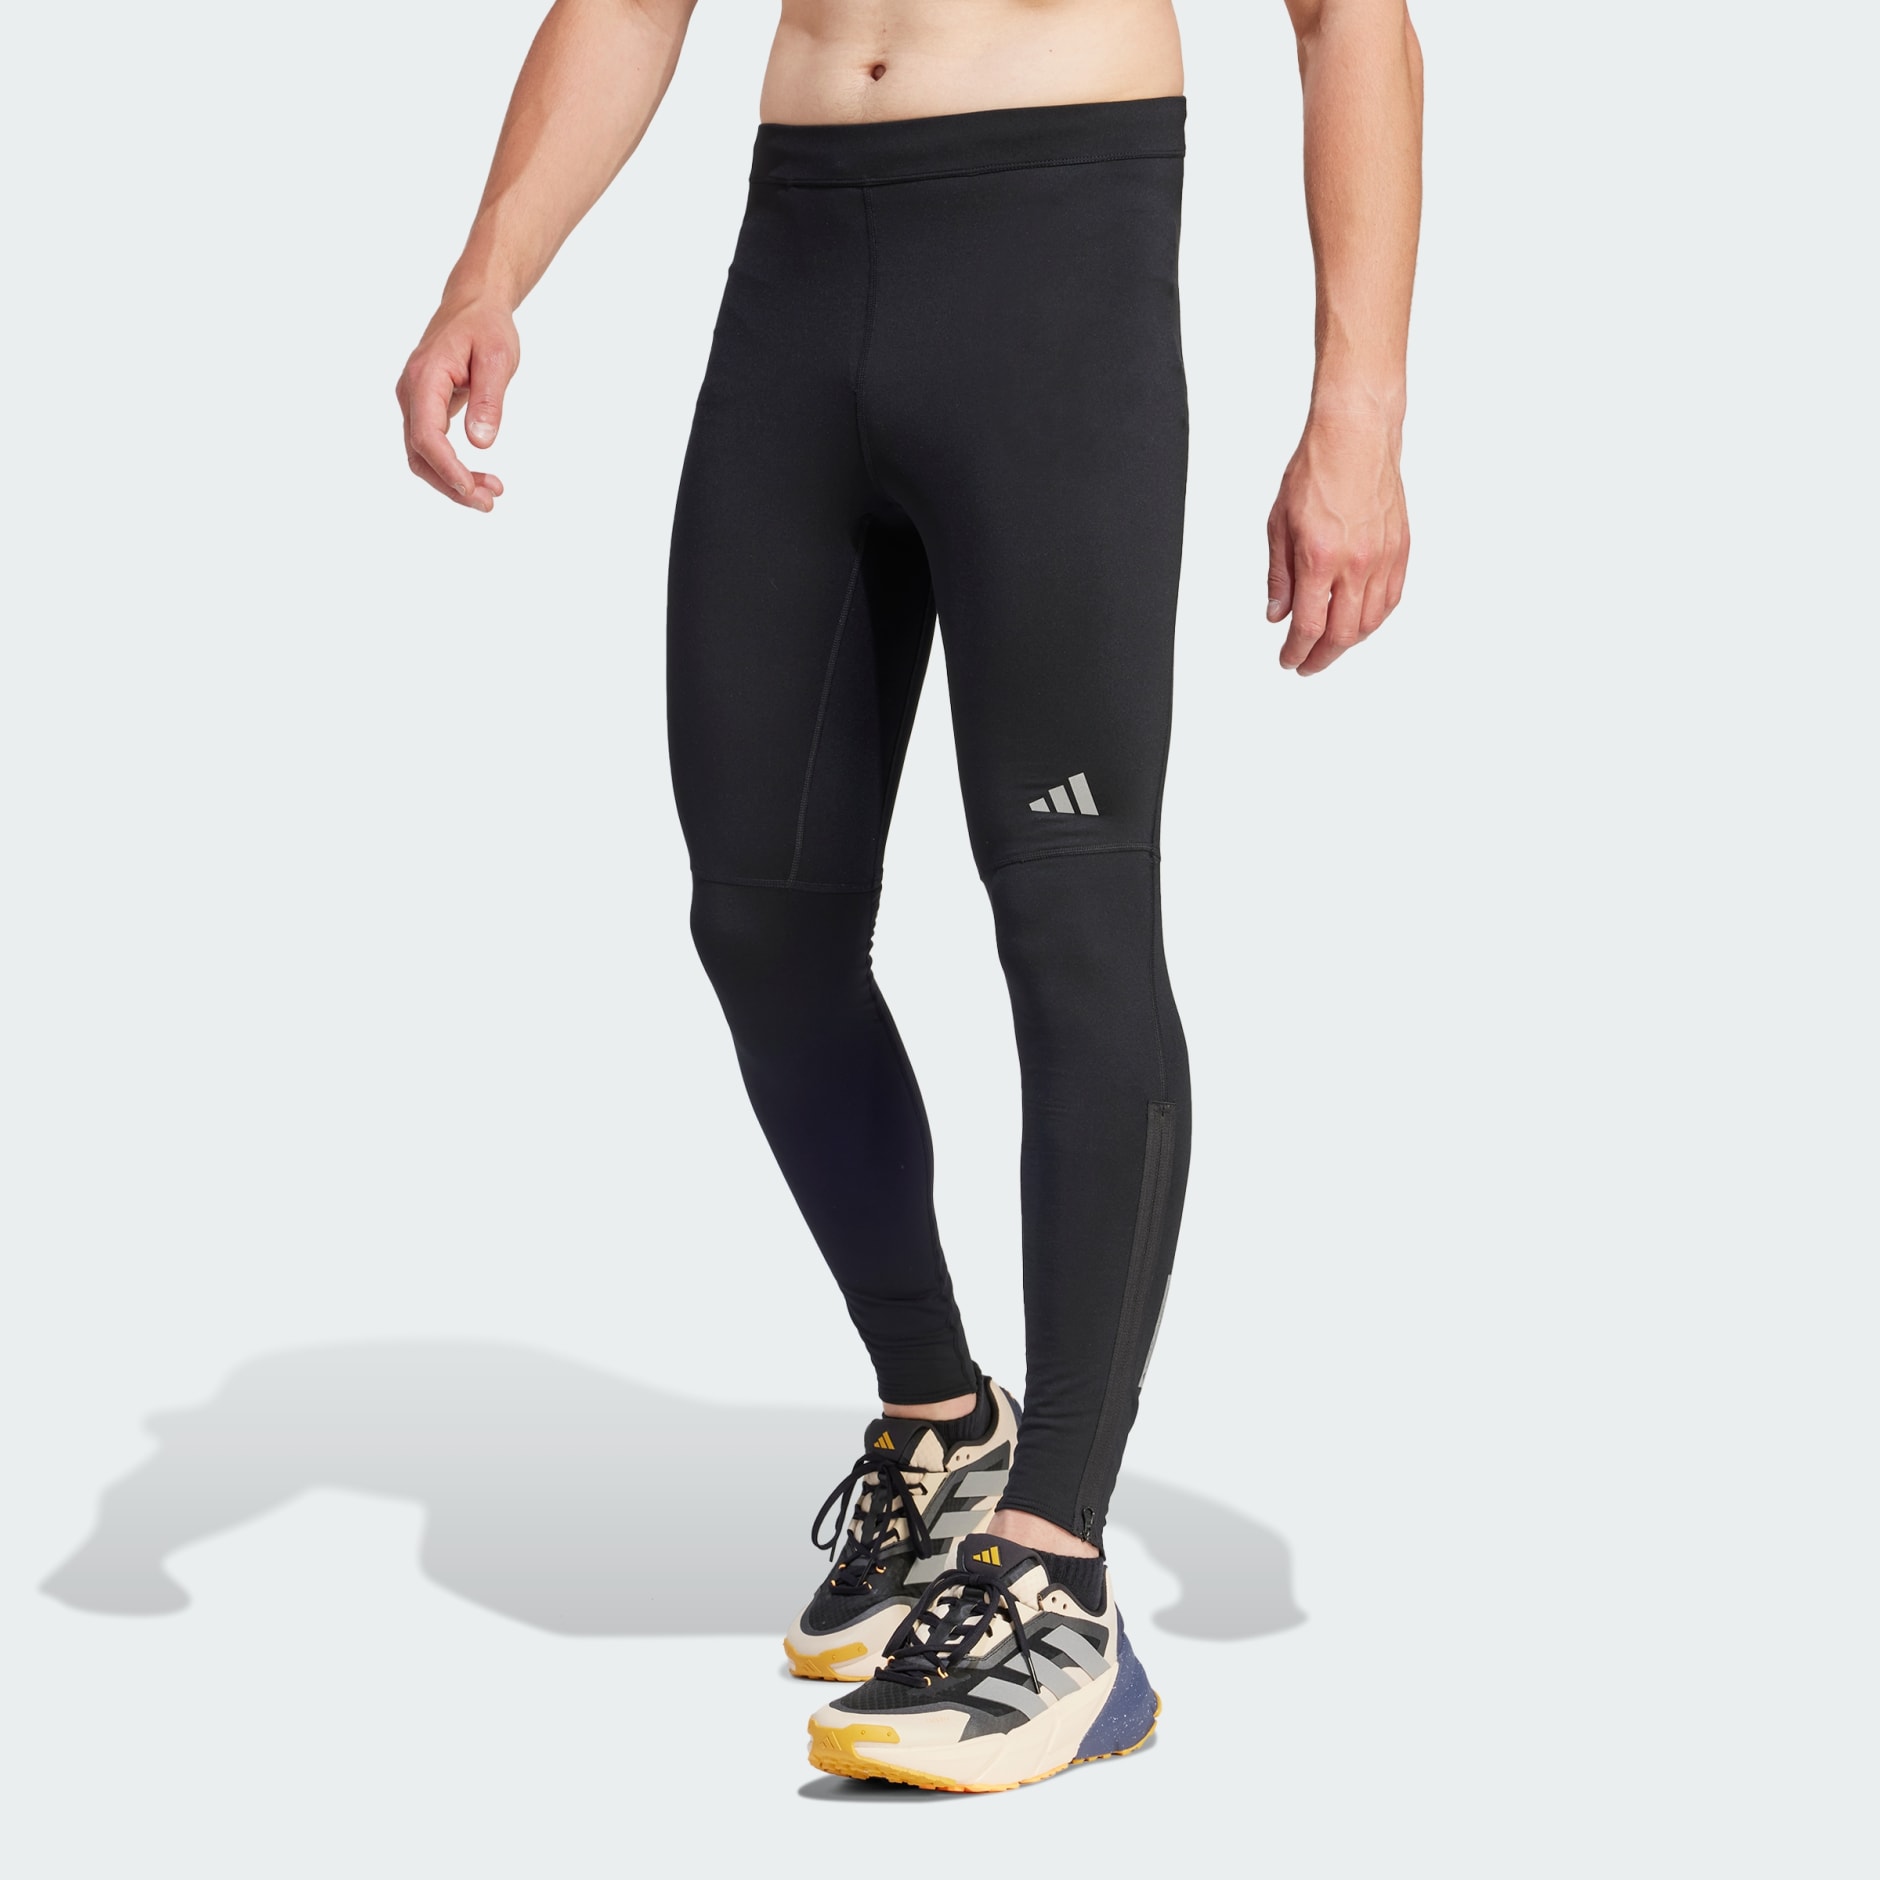 Clothing - Ultimate Running Conquer the Elements AEROREADY Warming